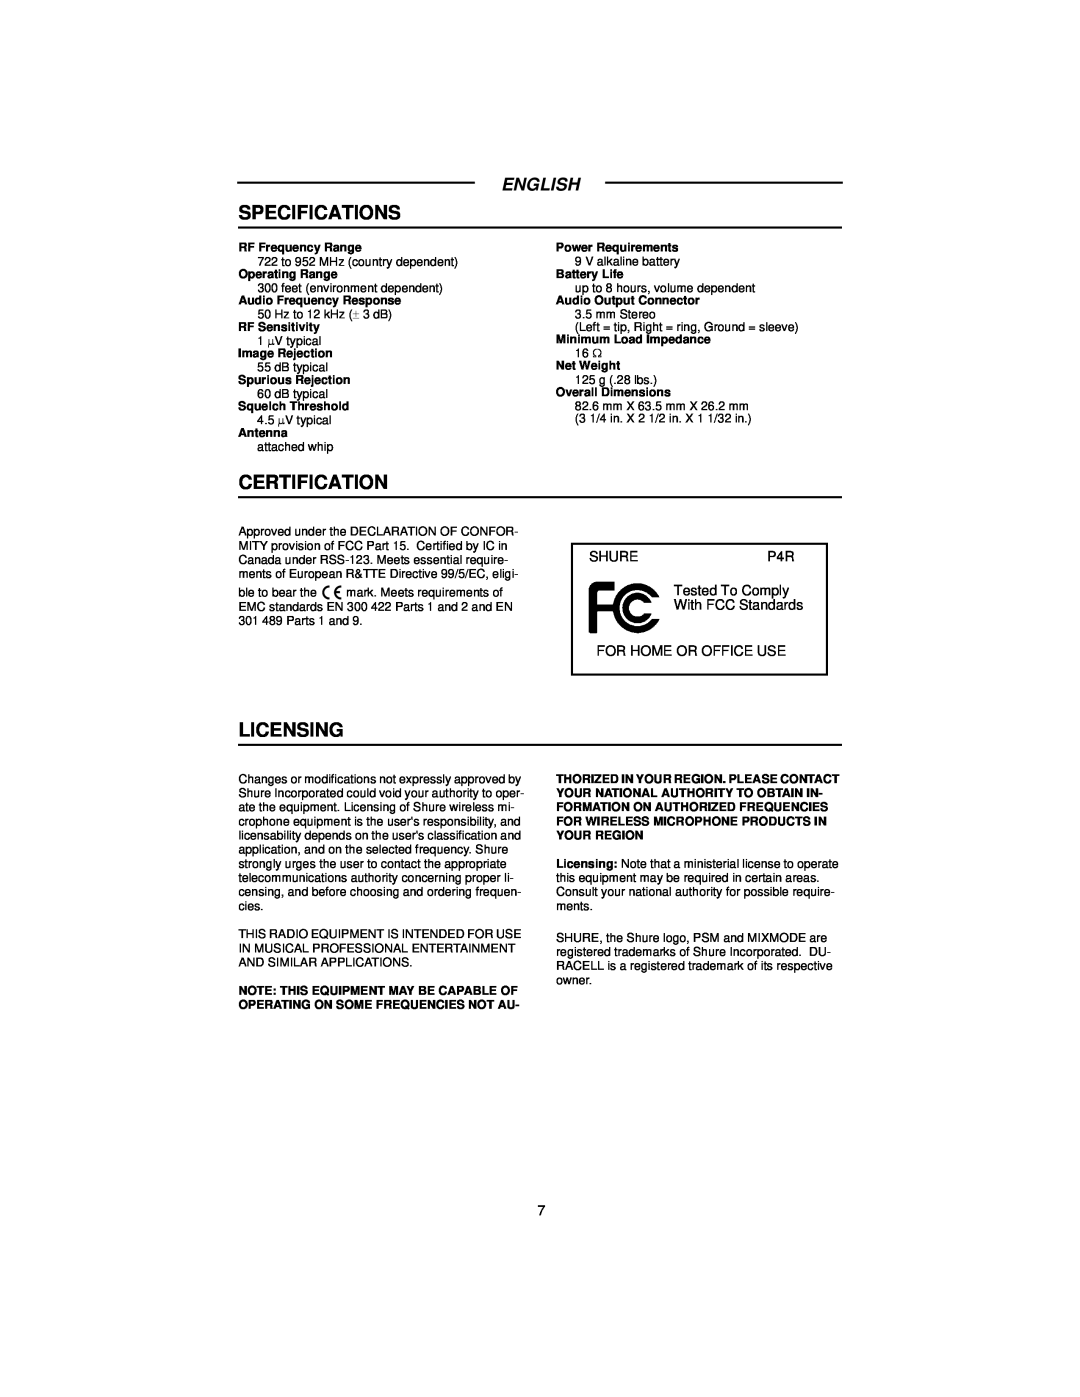 Shure manual Specifications, Certification, Licensing, English, SHUREP4R Tested To Comply With FCC Standards 